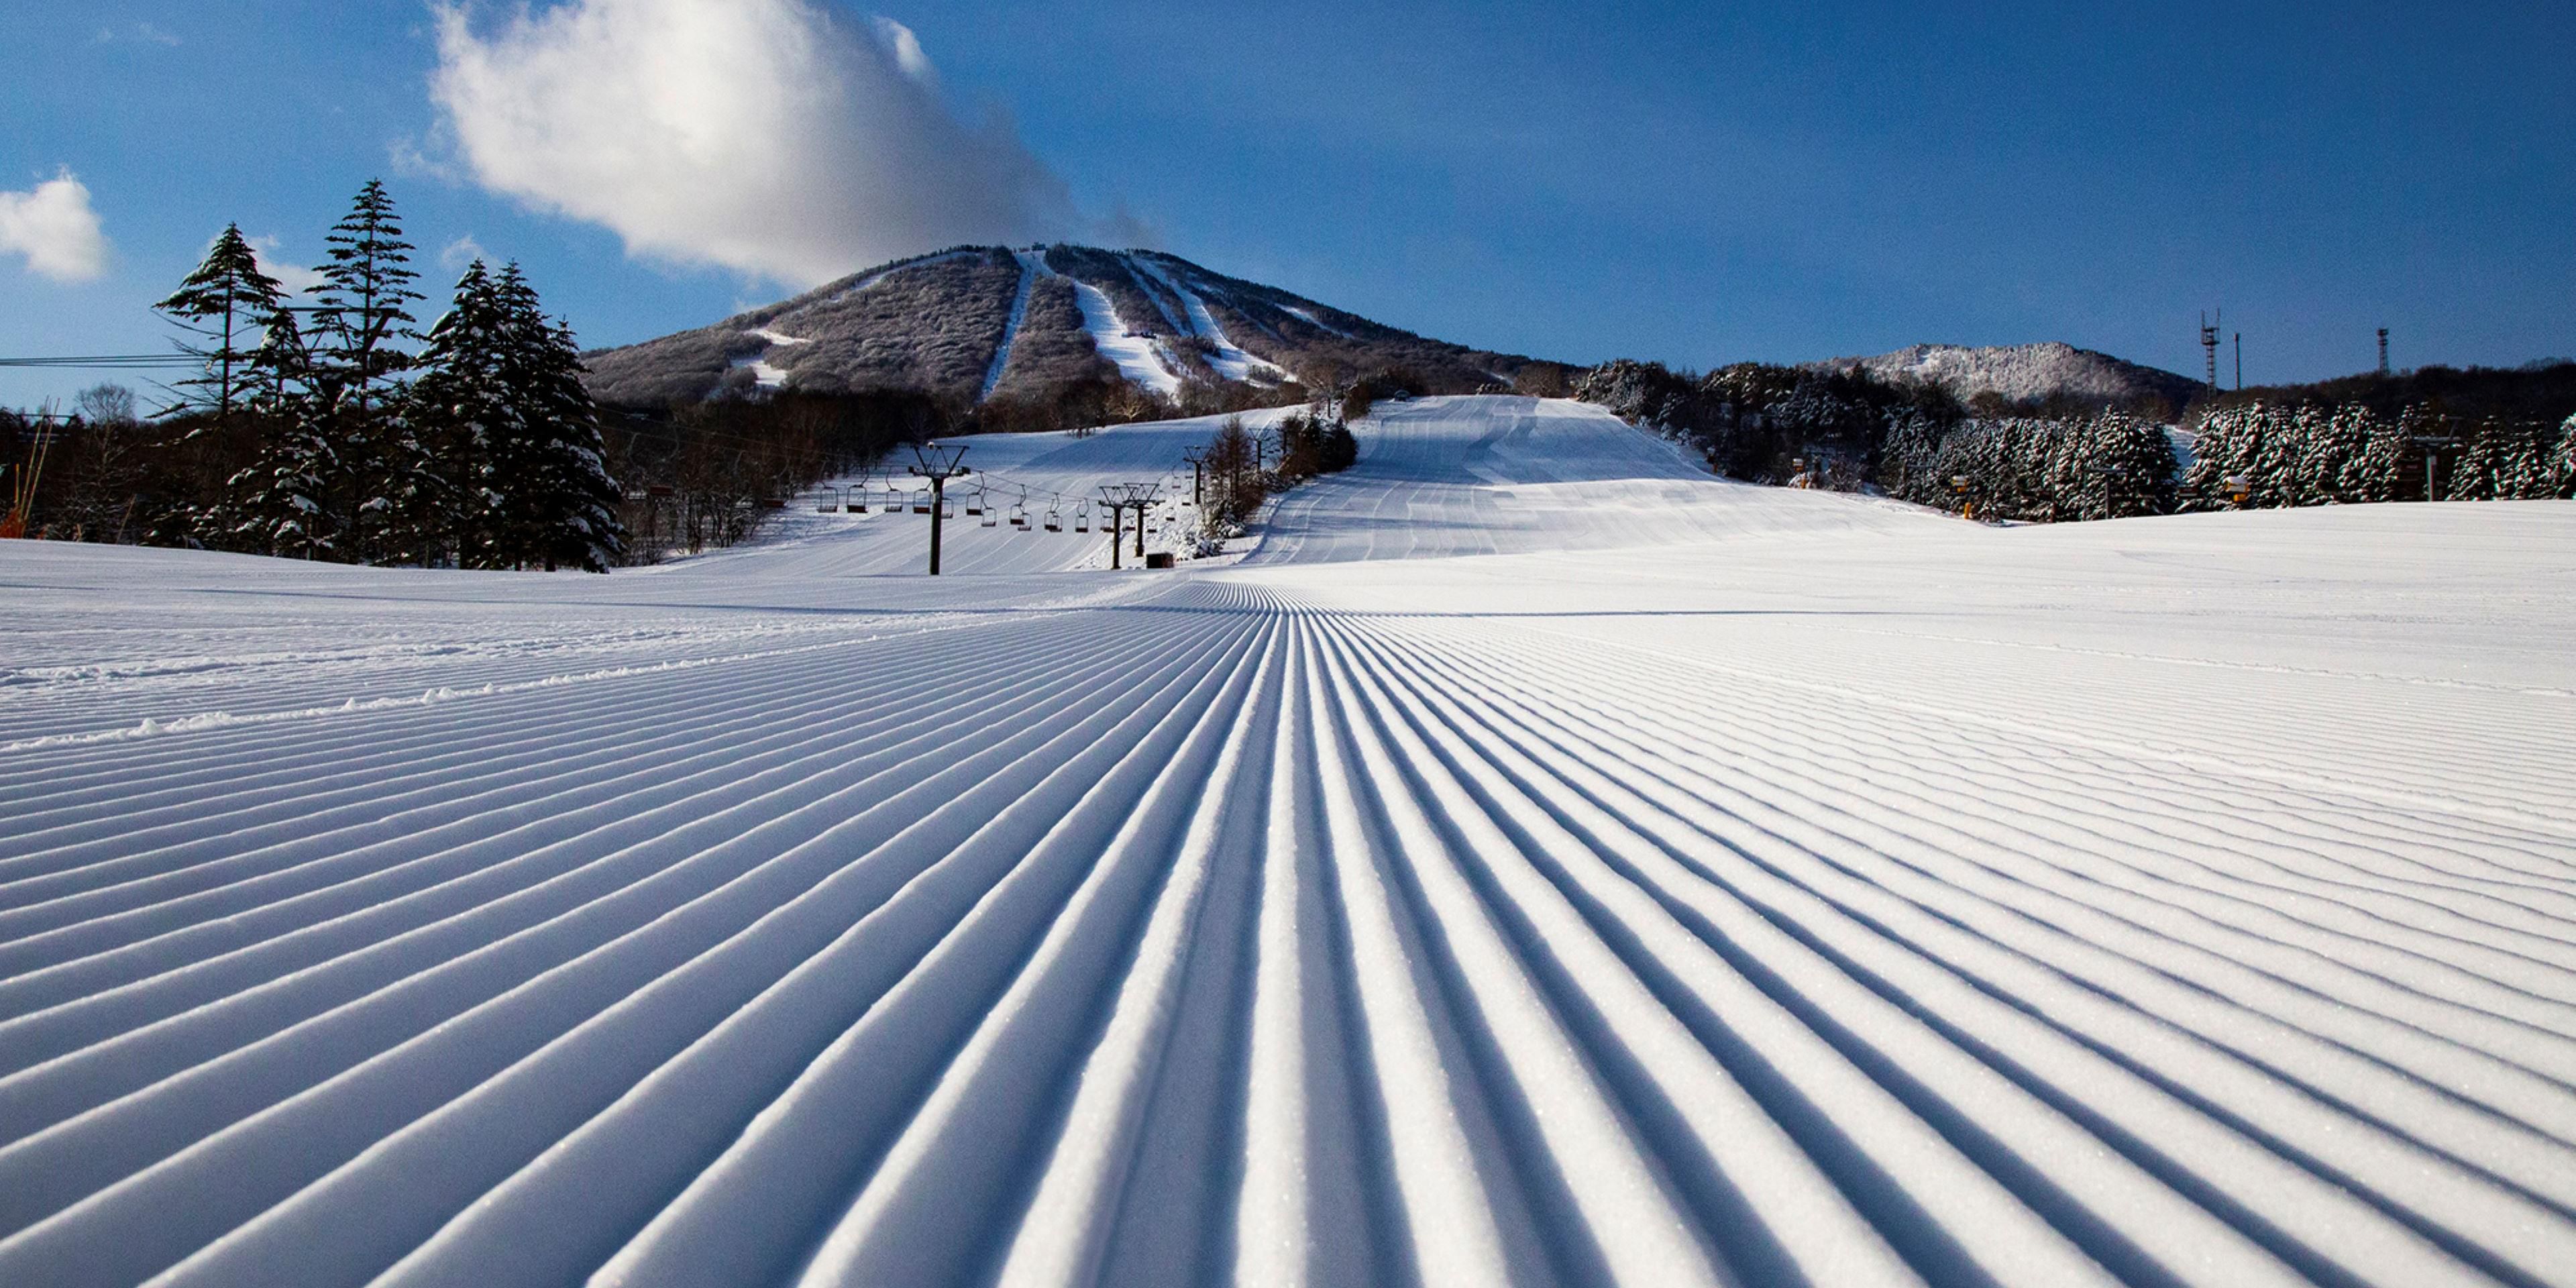 Appi Kogen Ski Resort won “WORLD SKI AWARDS Japan’s Best Ski Resort 2022”. The mountain resort has all 21 terrains mainly long distance, and the best-quality snow, various courses for beginner to advanced, full of facilities such as rental, school, and restaurants.
*The ski resort is planned to open in December 2023.